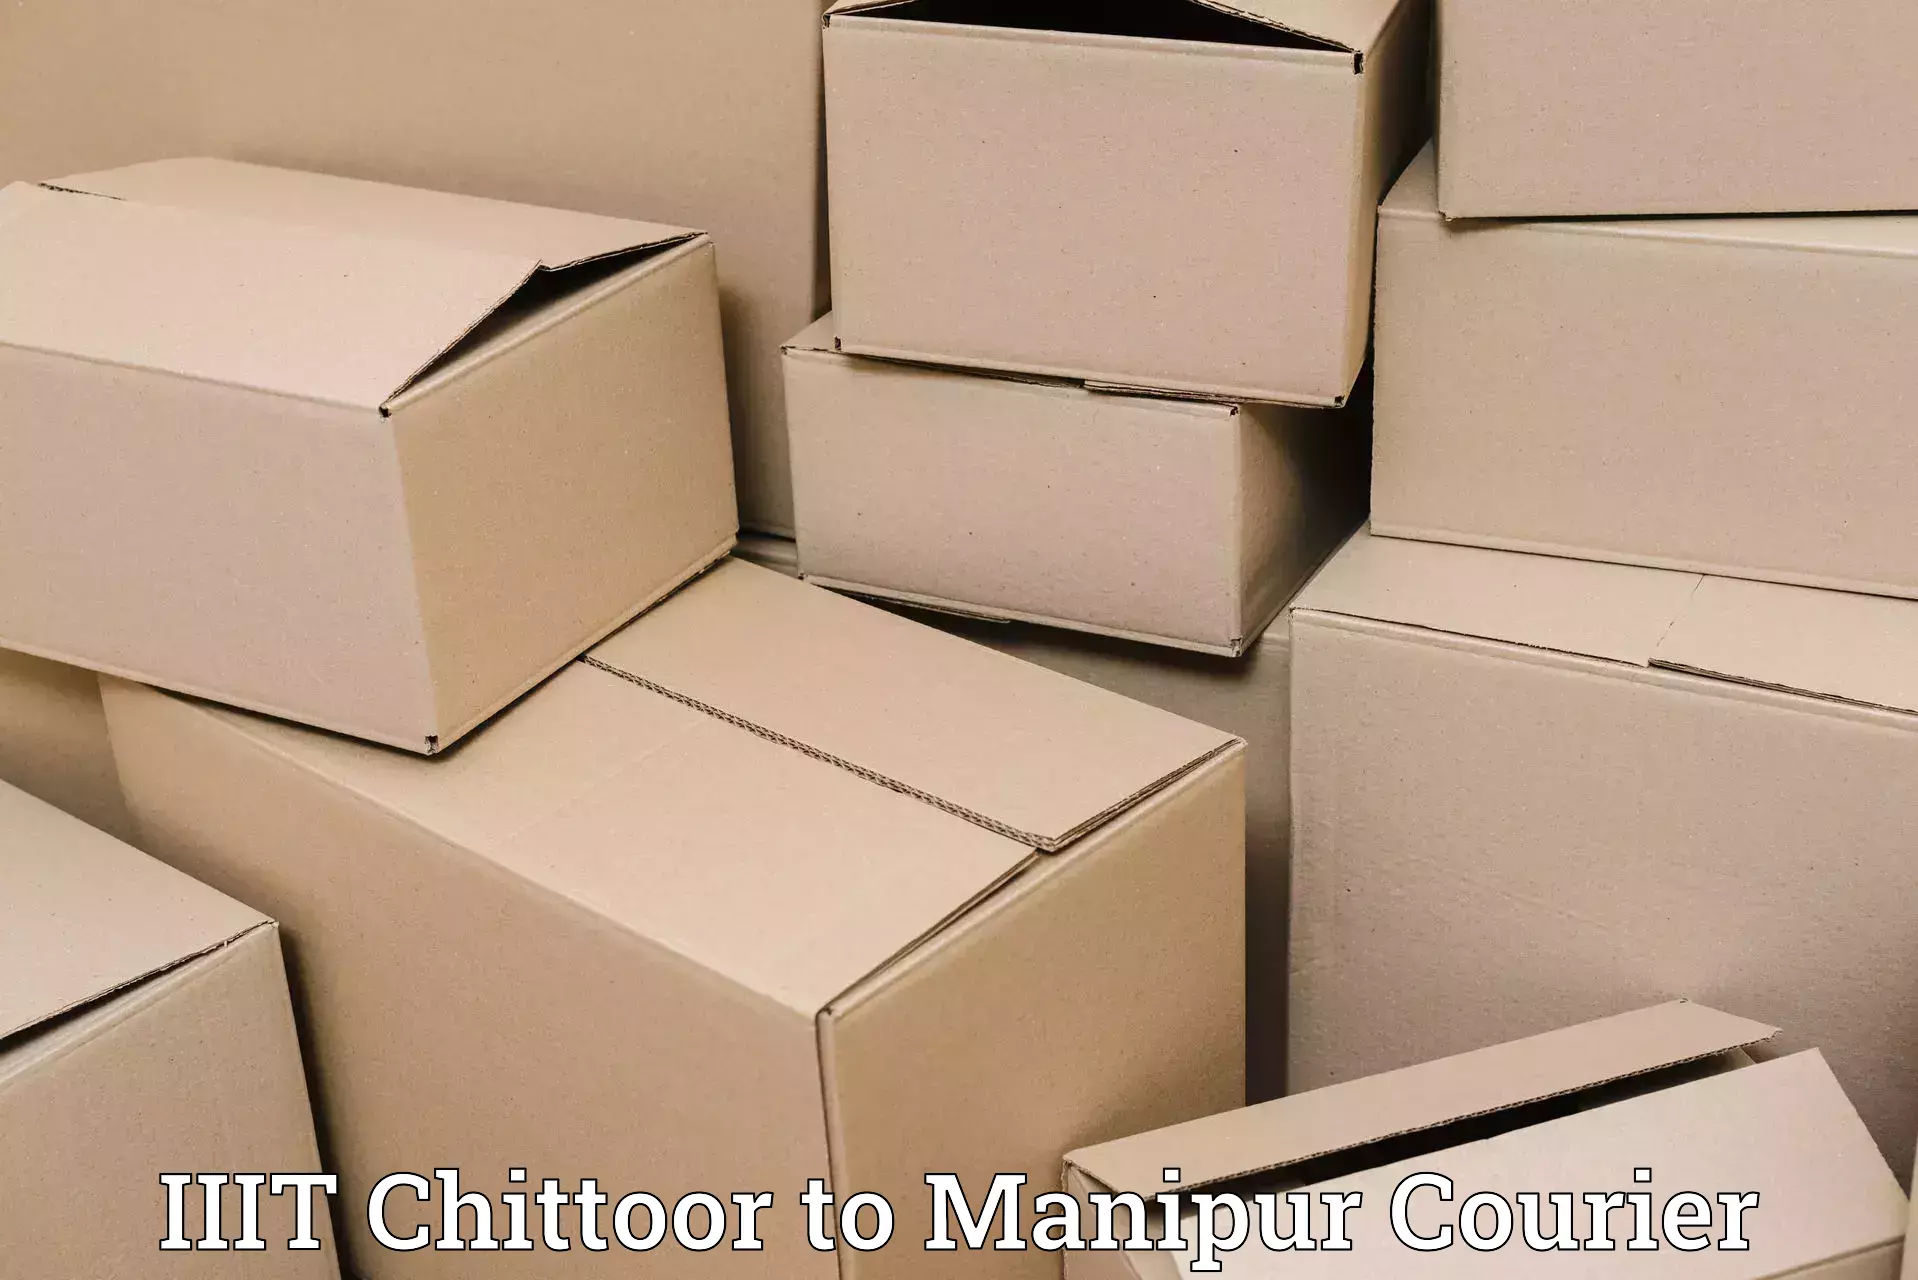 Seamless shipping service IIIT Chittoor to Chandel